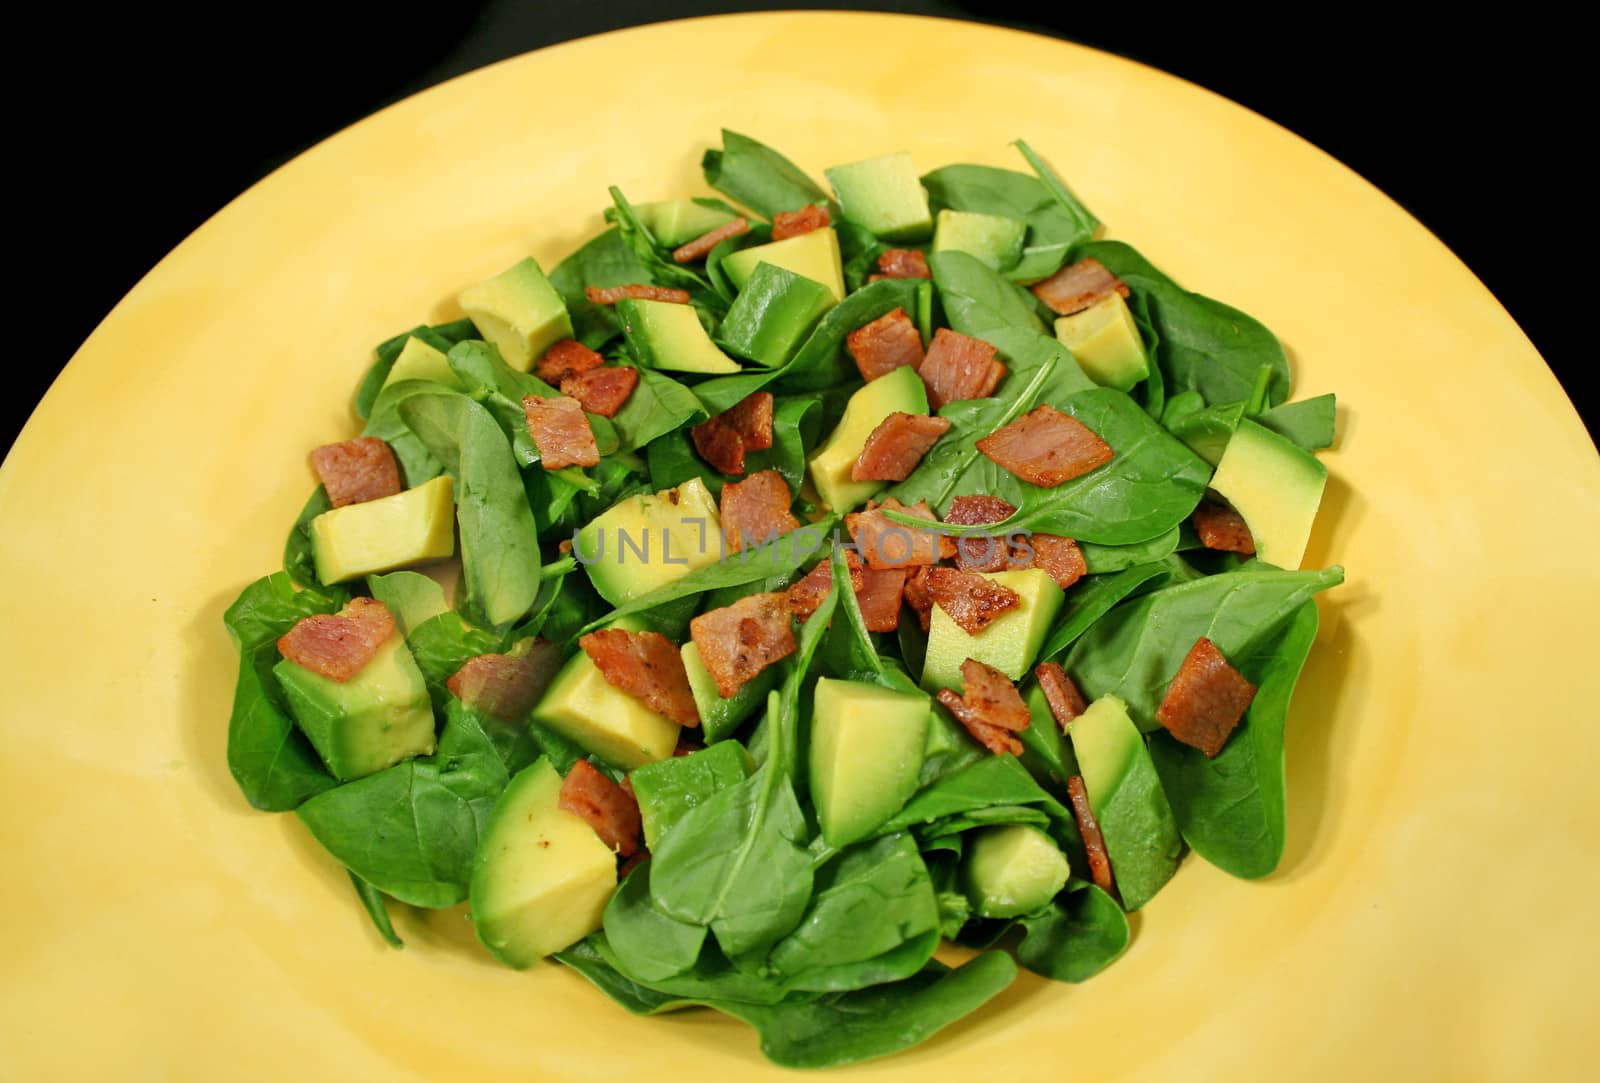 Delightful baby spinach, avocado and bacon salad ready to serve.